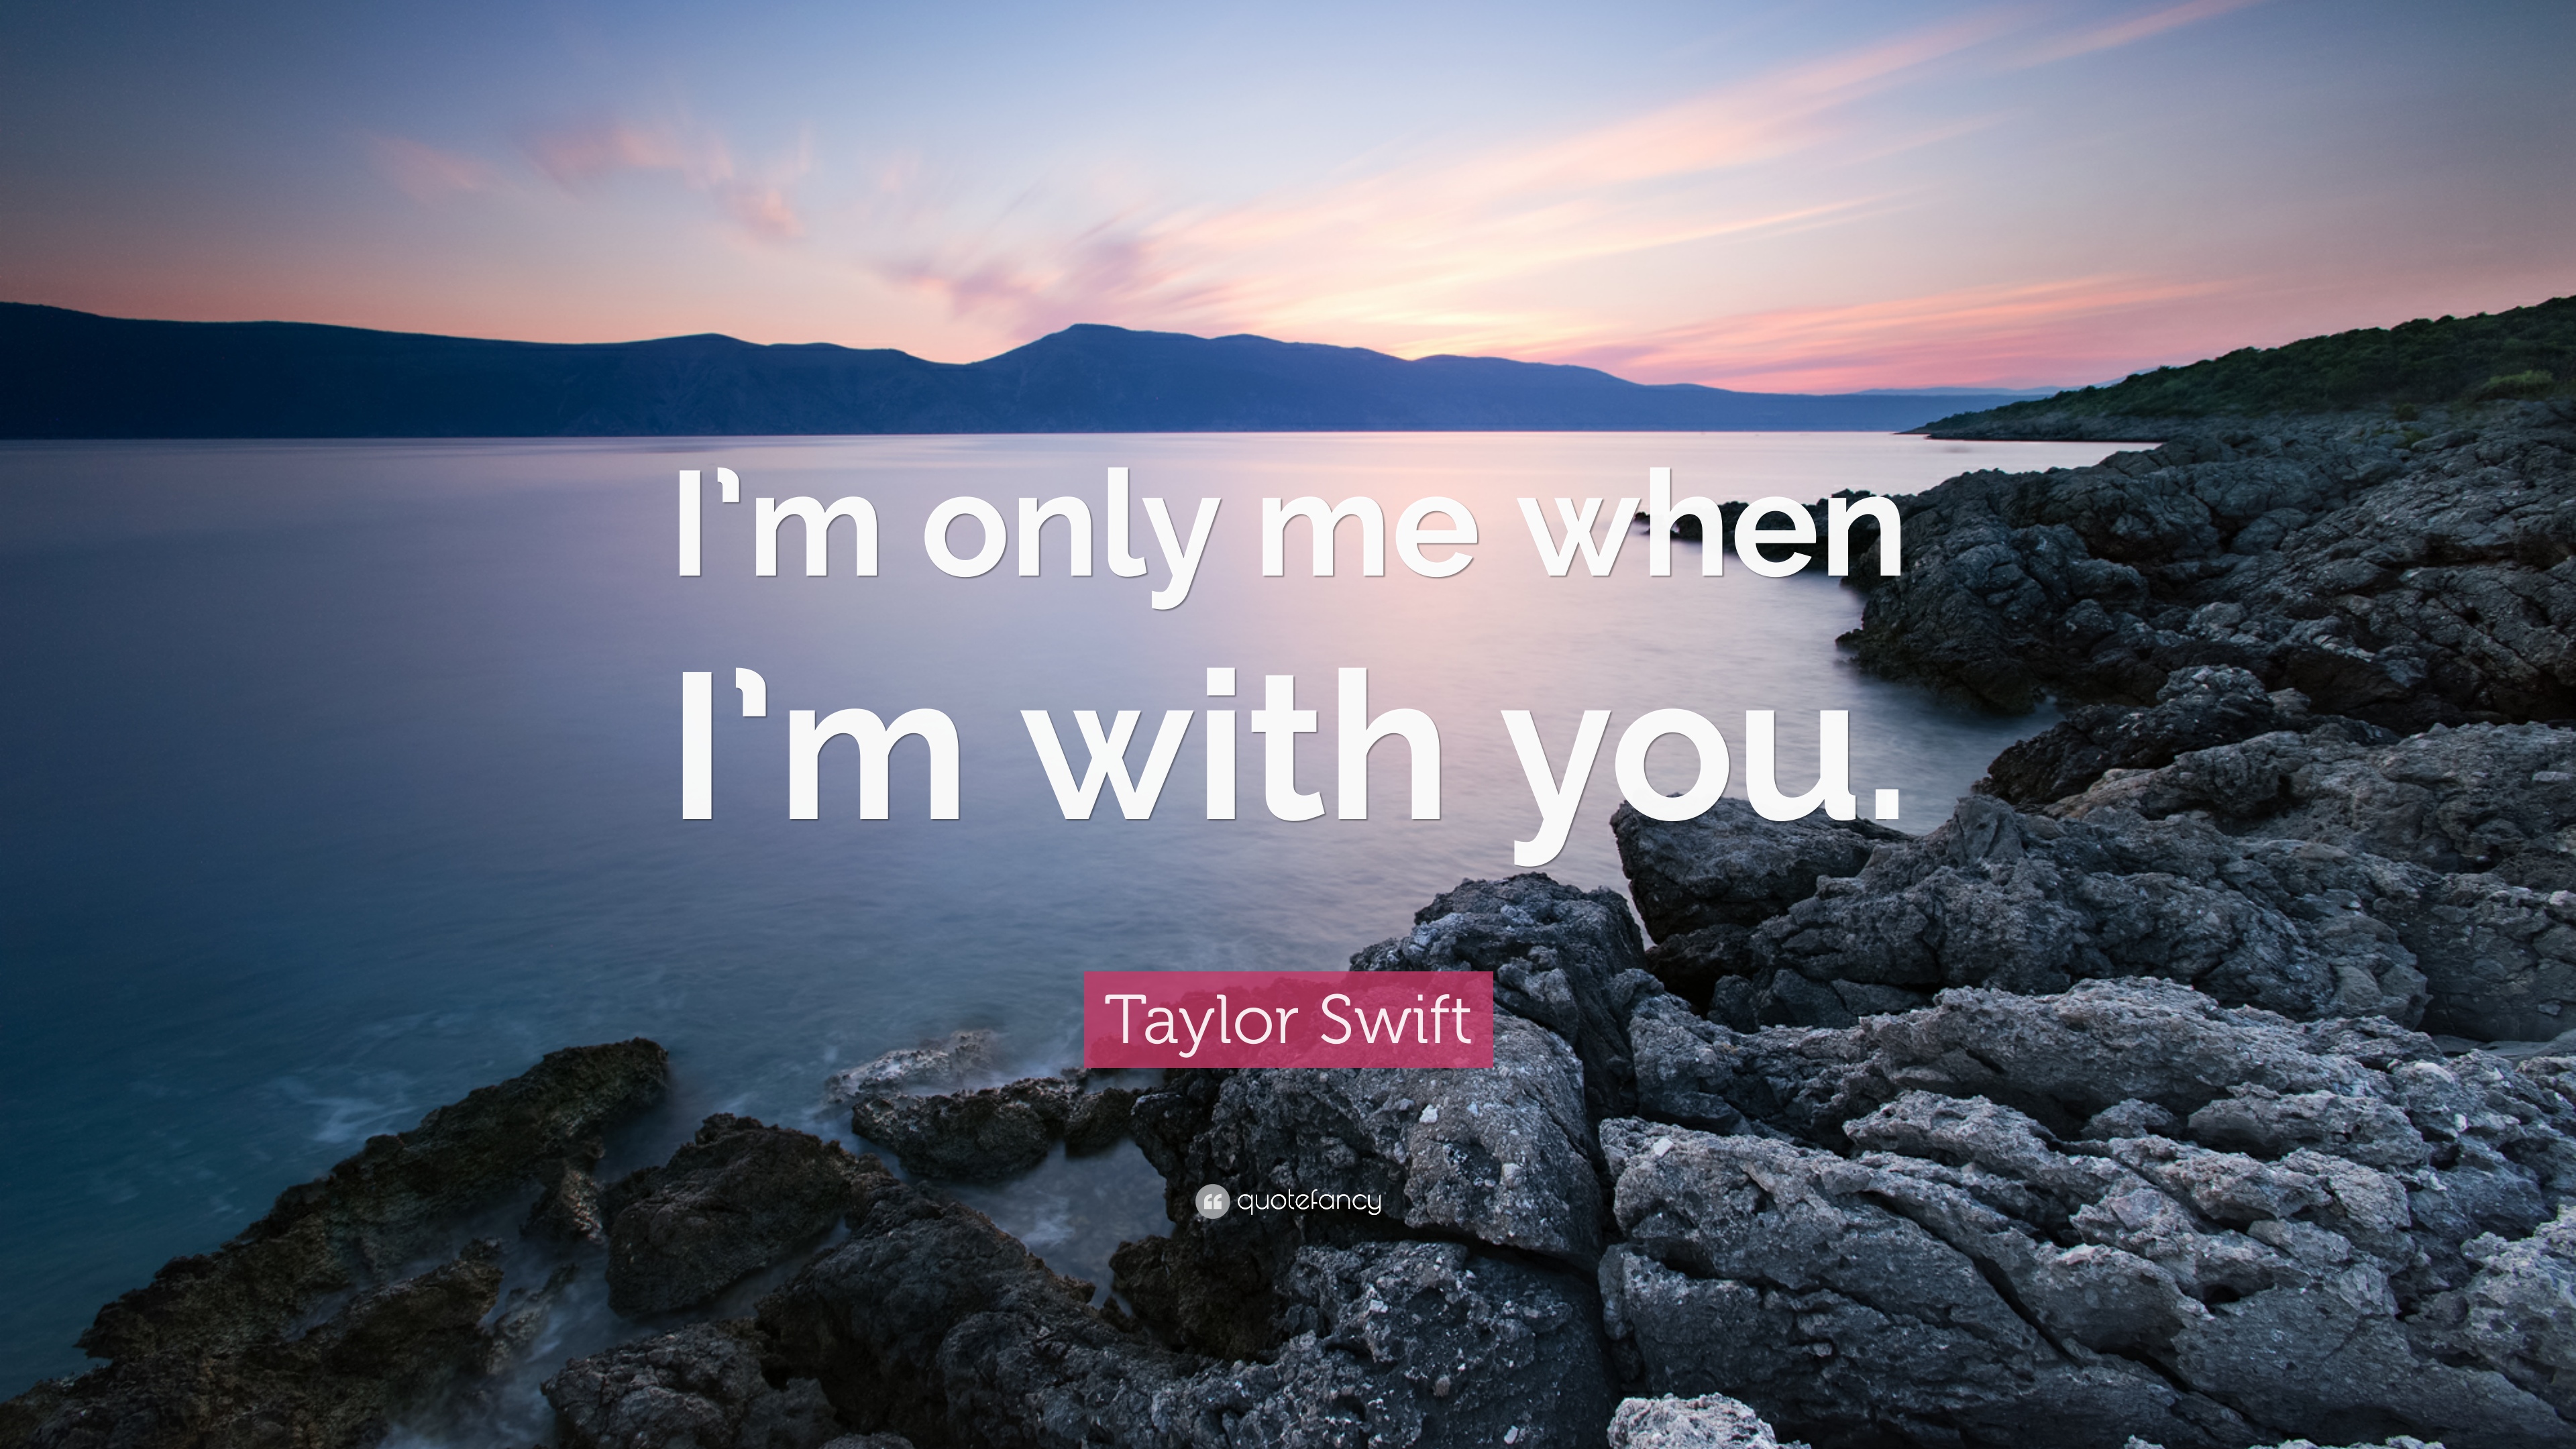 Taylor Swift Quote: “I'm only me when I'm with you.” (12 wallpapers ...